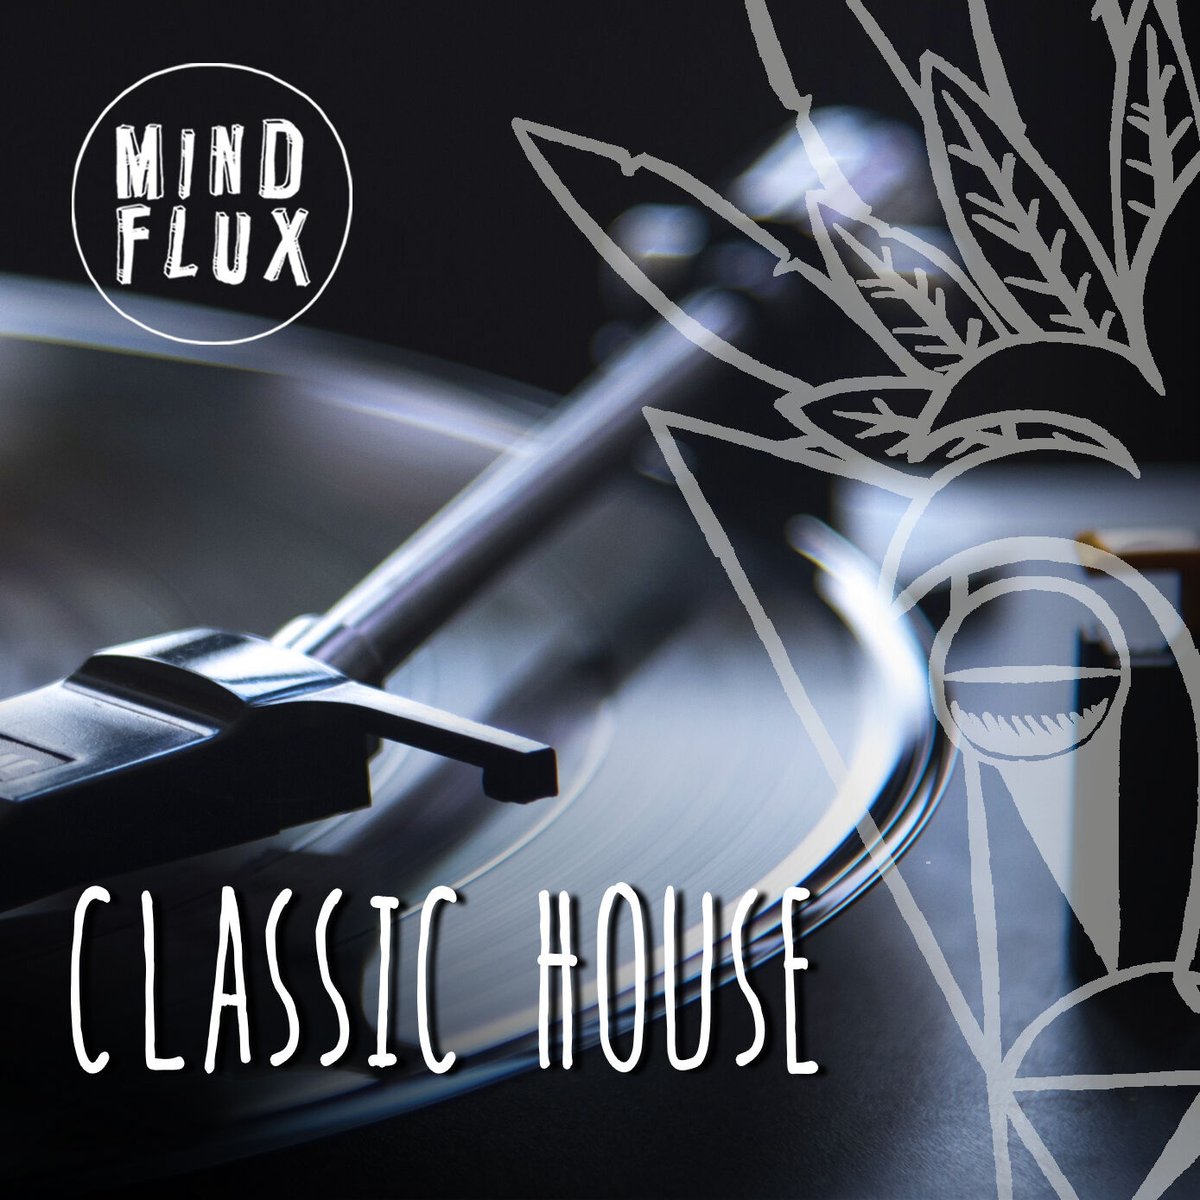 🎶 Step back in time with 'Classic House' – your ultimate sample pack for iconic house beats! 🏠✨ Inspired by the legends, crafted for today's producers. Available now on our site & top platforms like Wavetick, LANDR, & Loopmasters. bit.ly/3Ue3Tnb

#ClassicHouse